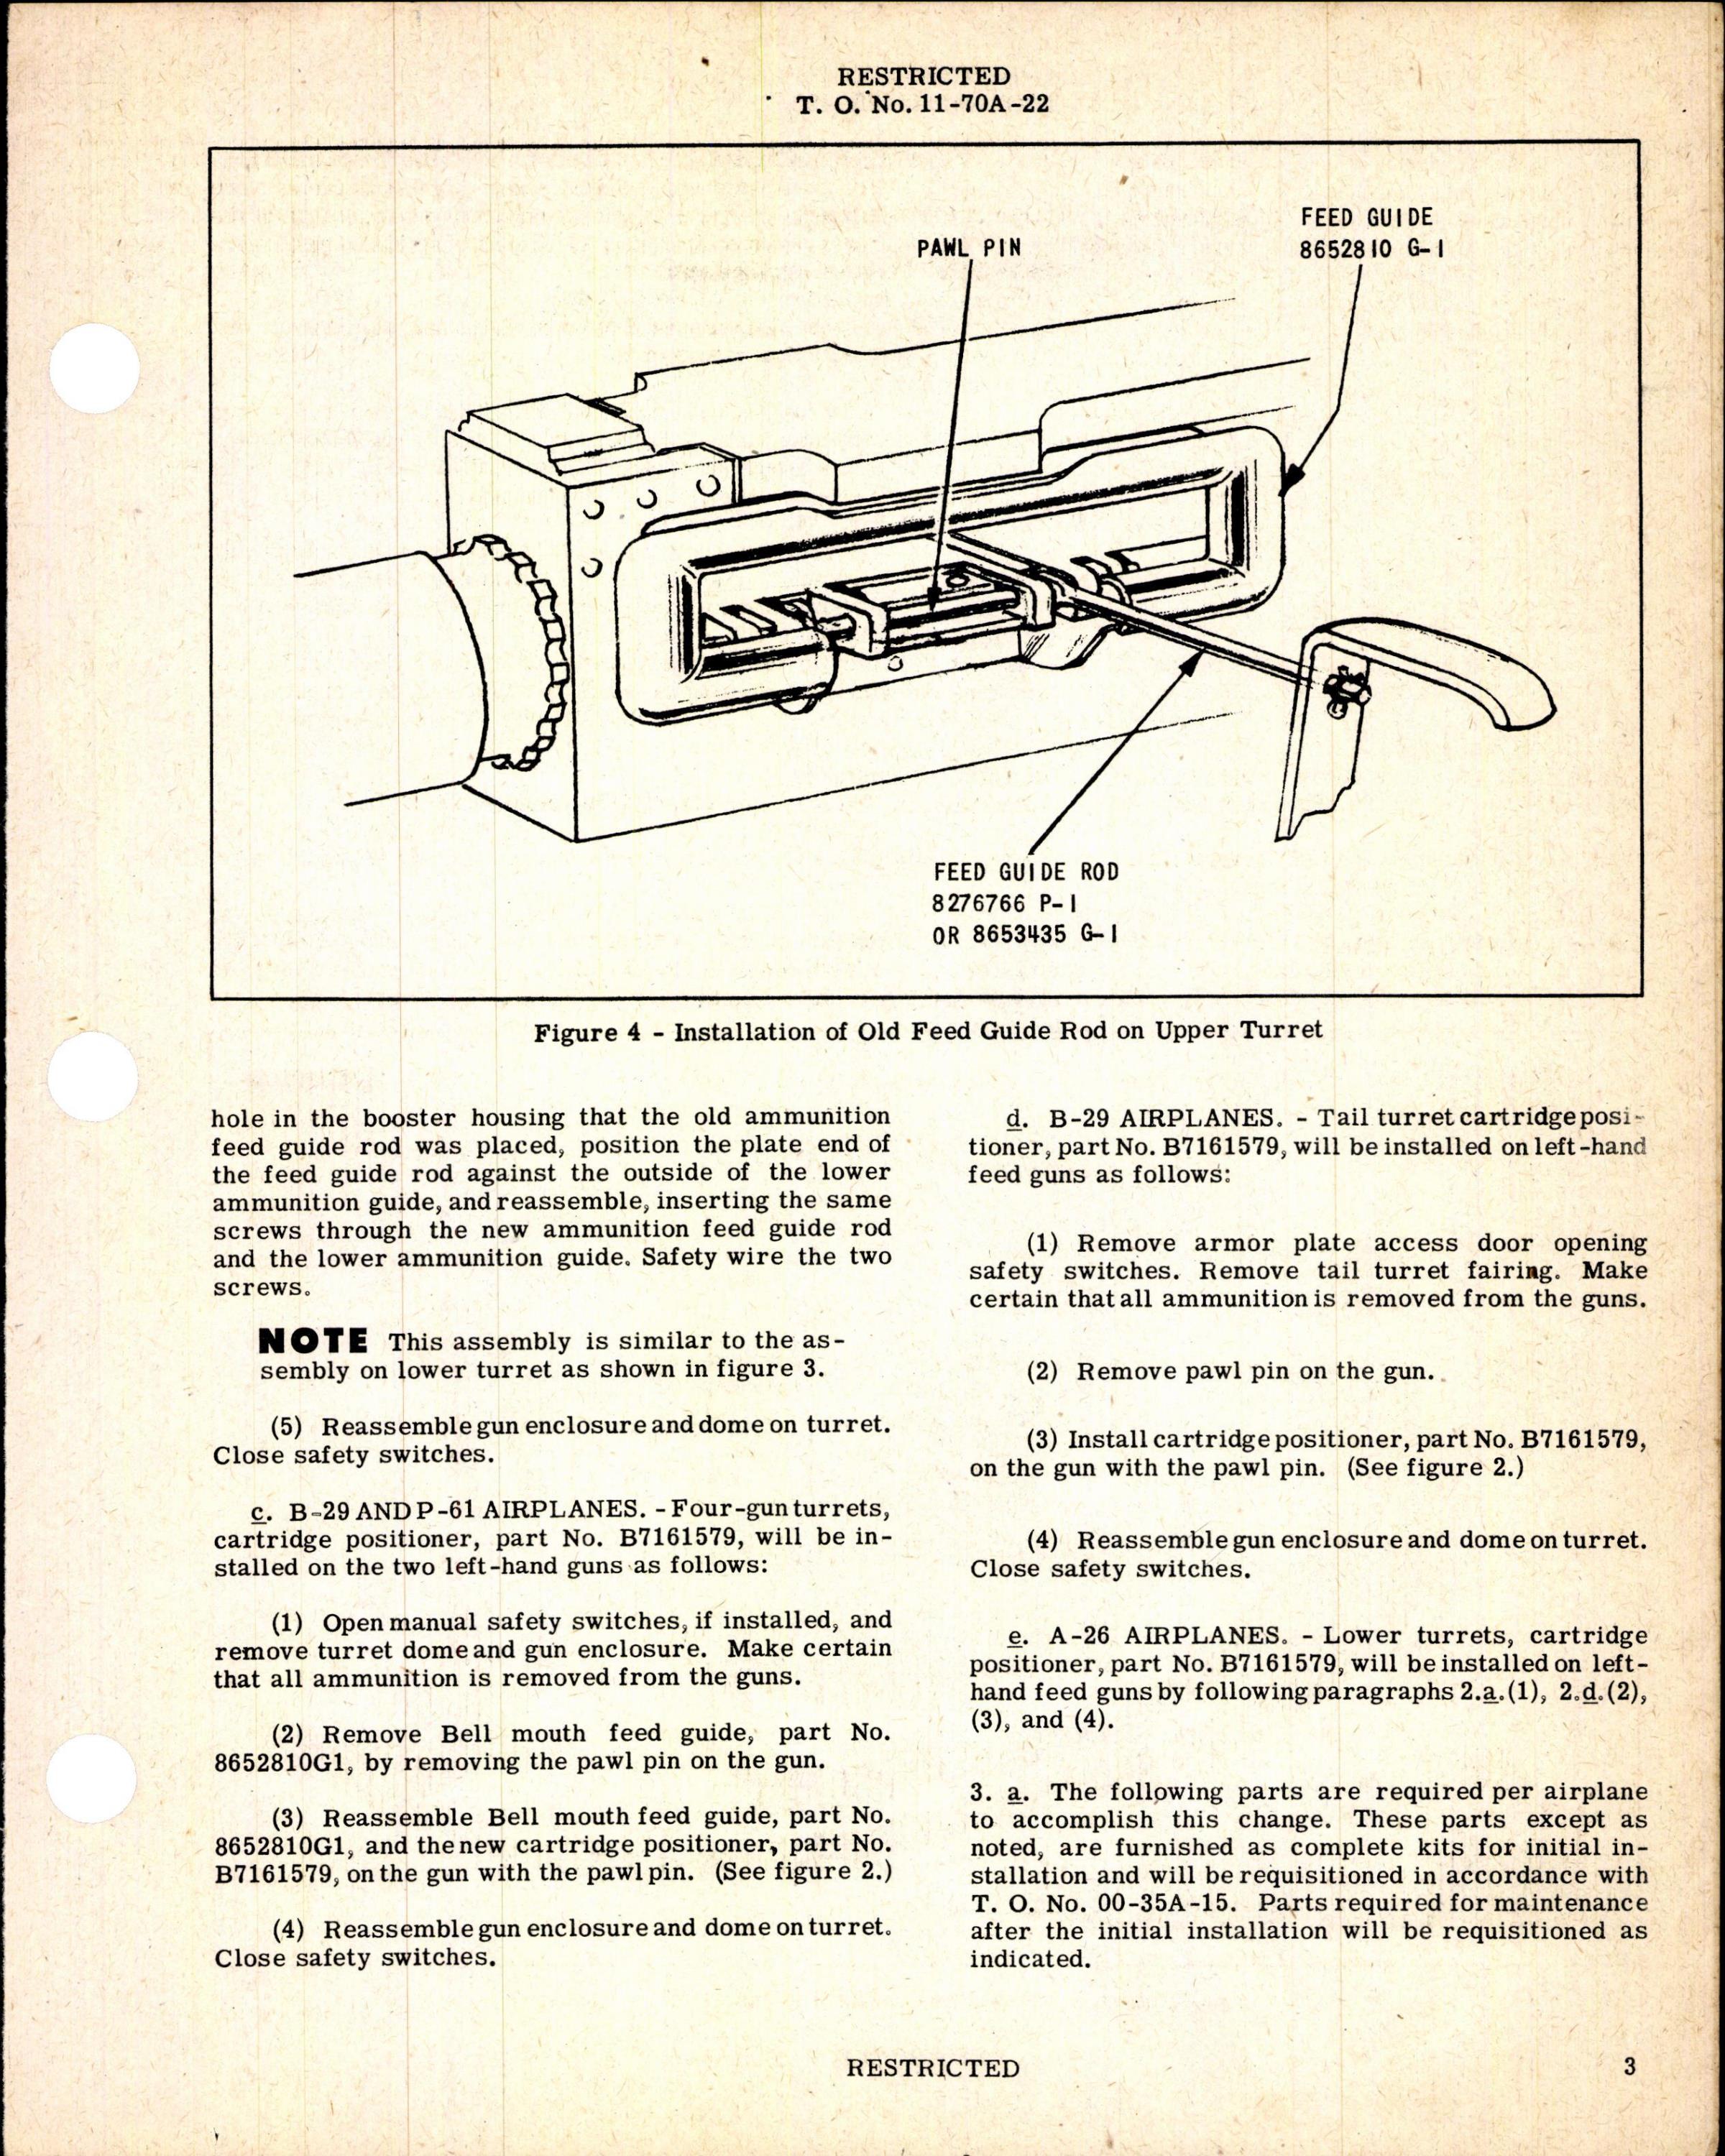 Sample page 3 from AirCorps Library document: Installation of Cartridge Positioners, Replacement of Feed Guide Rods